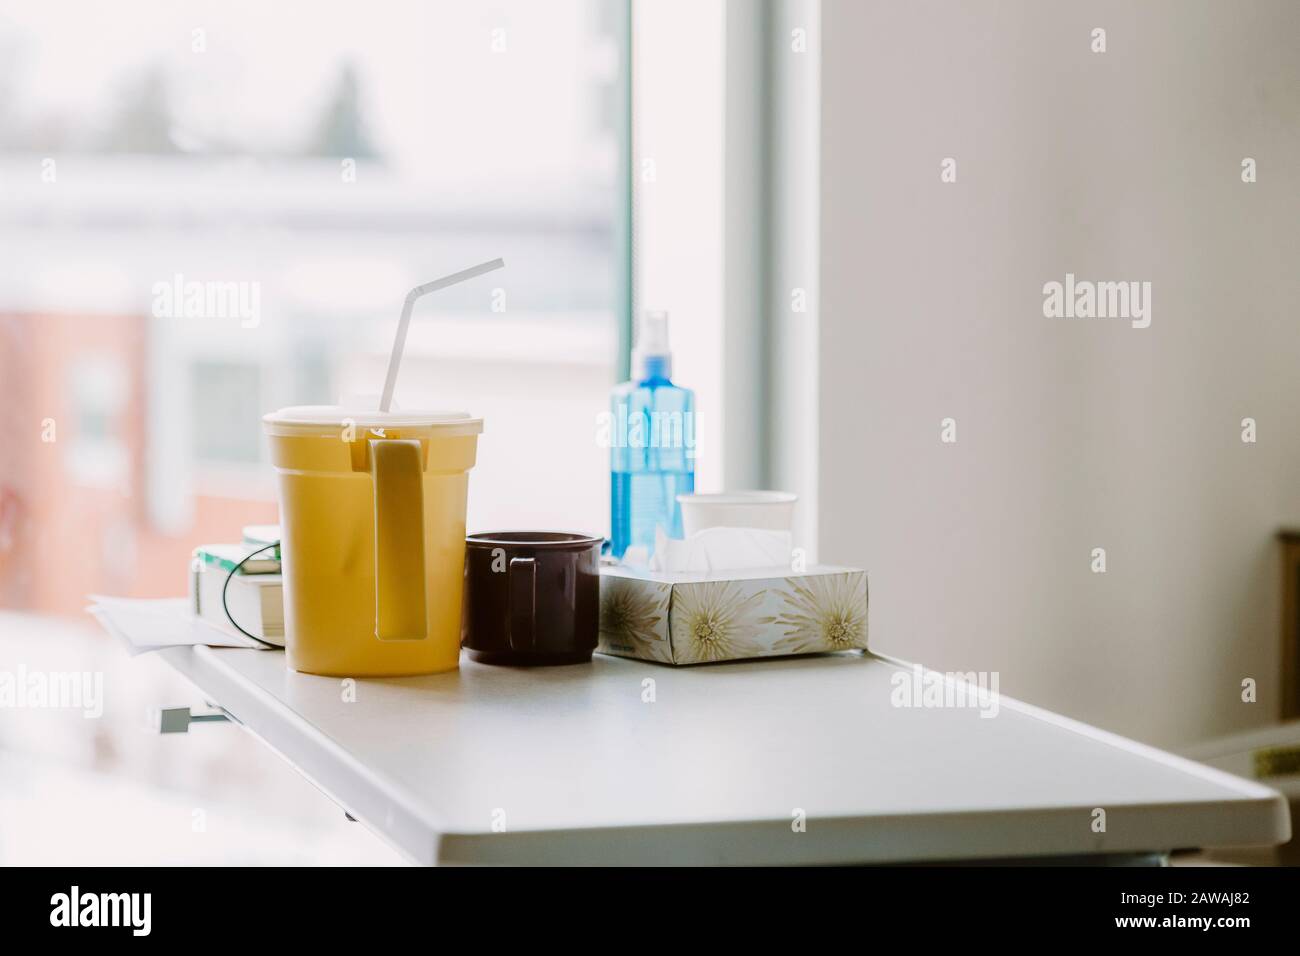 Items on bedside table in hospital room with window in background Stock Photo